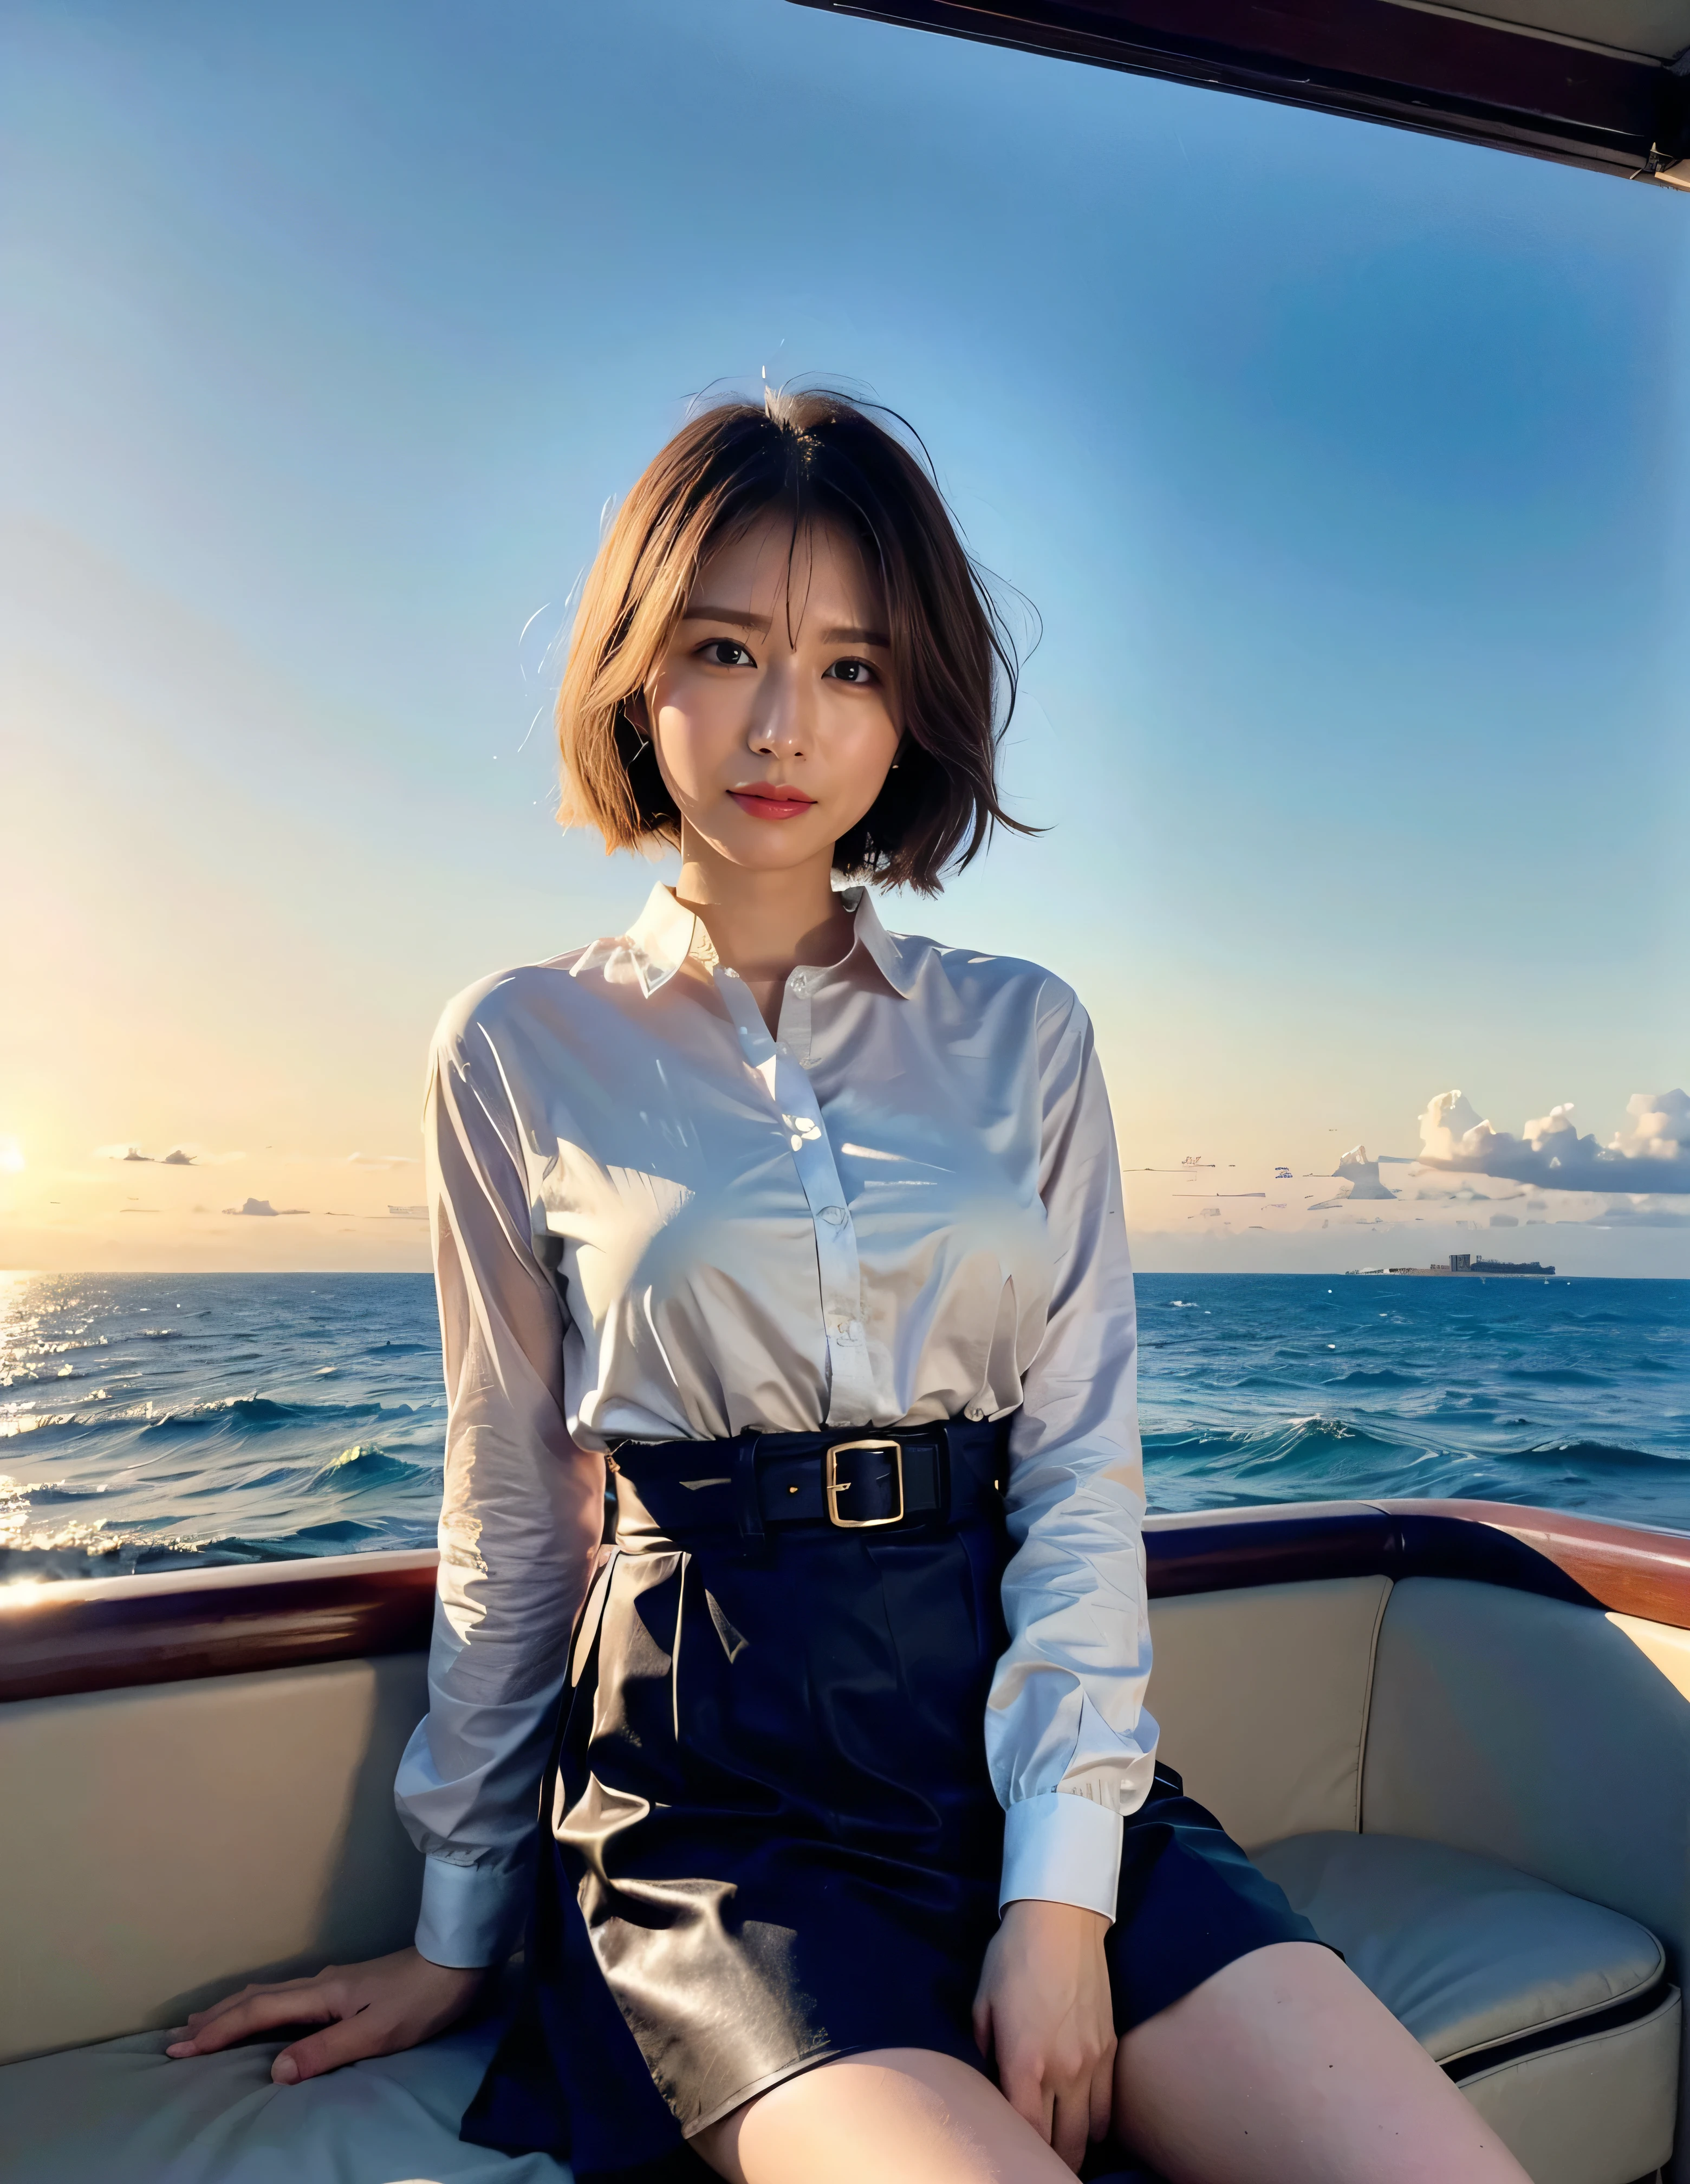 Woman standing on a boat、Light brown hair、Elegant hairstyle、Blue Eyed Woman、A woman with a cute upward gaze、When the sky gets dark、The gentle lights of the ship shine、The sky turns red as the sun sets、Tight clothing that shows your body lines、、A classy white blouse or white collared shirt、The first button of her blouse is lewdly open、Genuine Leather Belt、革のShort skirt、Dress elegantly着こなす、Luxury Bagedium Short Hair:1.4））、Skyscrapers seen across the sea、Manhattan 私sland is visible offshore、Woman on a sightseeing boat、、The sun shines on her、Light brown hair、Light brown hair、The sky was dyed red、There are clouds、私t's cute、An elegantly dressed woman is sitting on a boat and watching the sunset、Her ample breasts are obvious even through her clothes..、The shining sun is so beautiful、Dusk is approaching、Lens flare、私 can see the sun setting、（（Sunlight reflecting off the ocean、Ocean View、The sun shines on the ocean、&#39;beautiful.、Small earrings、私t&#39;evening、Birds are also flying、、Brown Hair Color、Tying up hair、The woman is on the right:1.4））、Luxury Leather Belts、Shiny clothes、Light beige hair color、Background Blur、Braid only the front hair、Light brown hair、｛｛Cowgirl Shot｝｝、（（Close-up shot from the waist up、Ample breasts:1.4））、Smile、Silk clothing、Ample breasts that can be seen even through clothes、Braid only the front hair、Cowboy Shot、Gorgeous white collared silk shirt and brown skirt、Dress elegantly、Luxury Bags、A lovely smile、（（Ample breasts））、Full body photo、ring、Short skirt、Tuck your hair behind one ear、Silver Necklace、smile、 Elegant ponytail、Caustics、Highly detailed photos、Very beautiful and ideal short hair、Super no makeup、(8k、RAW Photos、highest quality、masterpiece:1.2)、(Realistic、Realistic)、1 girl、((Medium Short Hair、Looking into the camera:1.4))、Hair blowing in the wind
